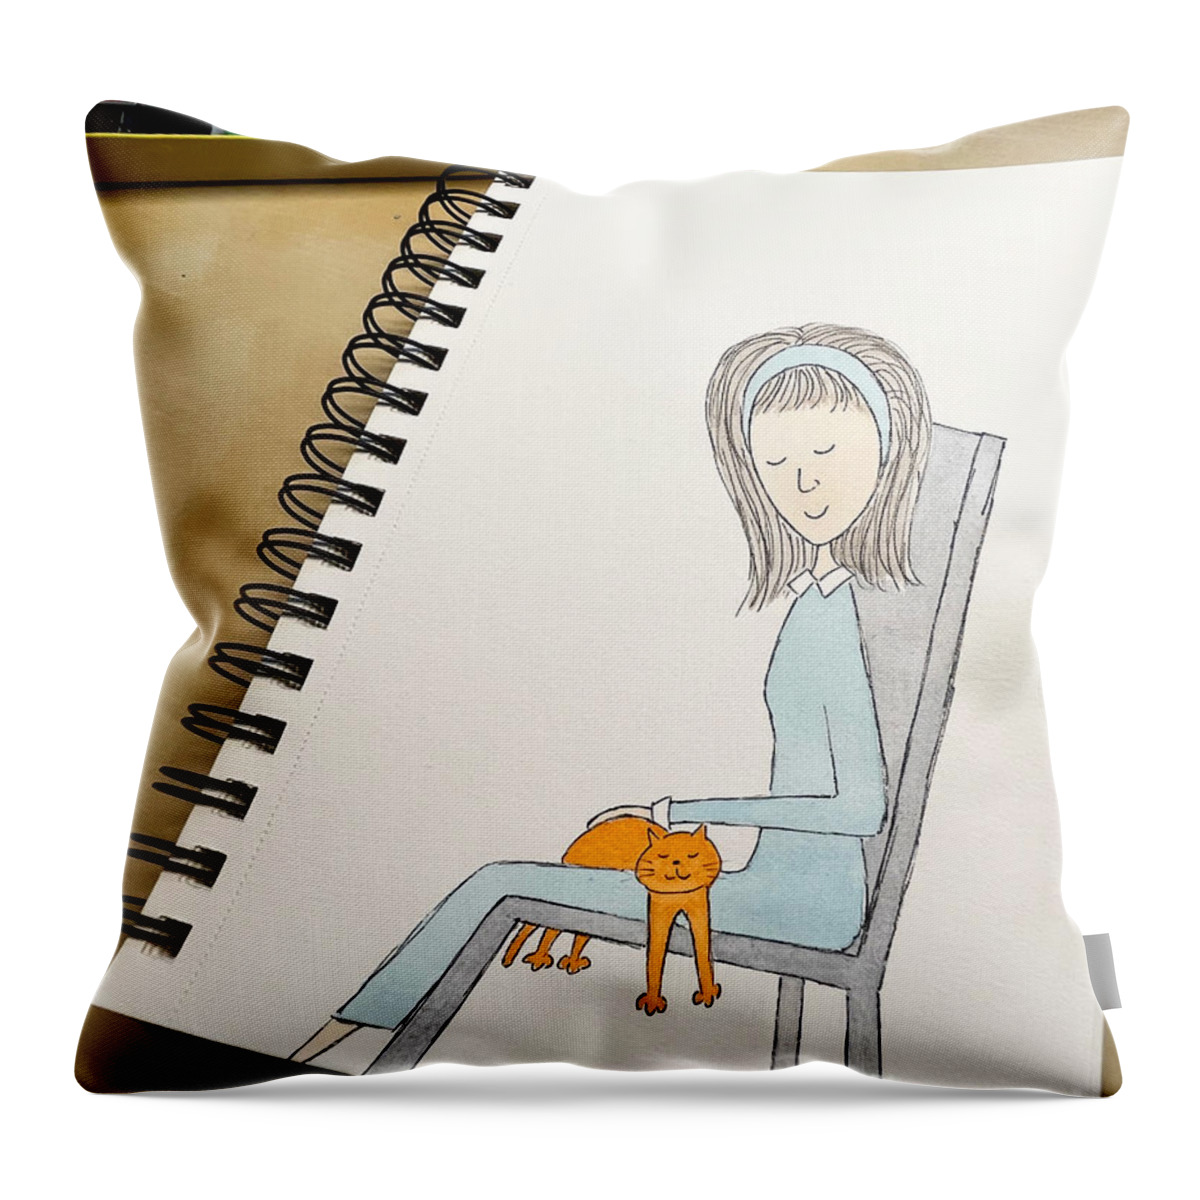  Throw Pillow featuring the digital art Day 63 by Donna Mibus